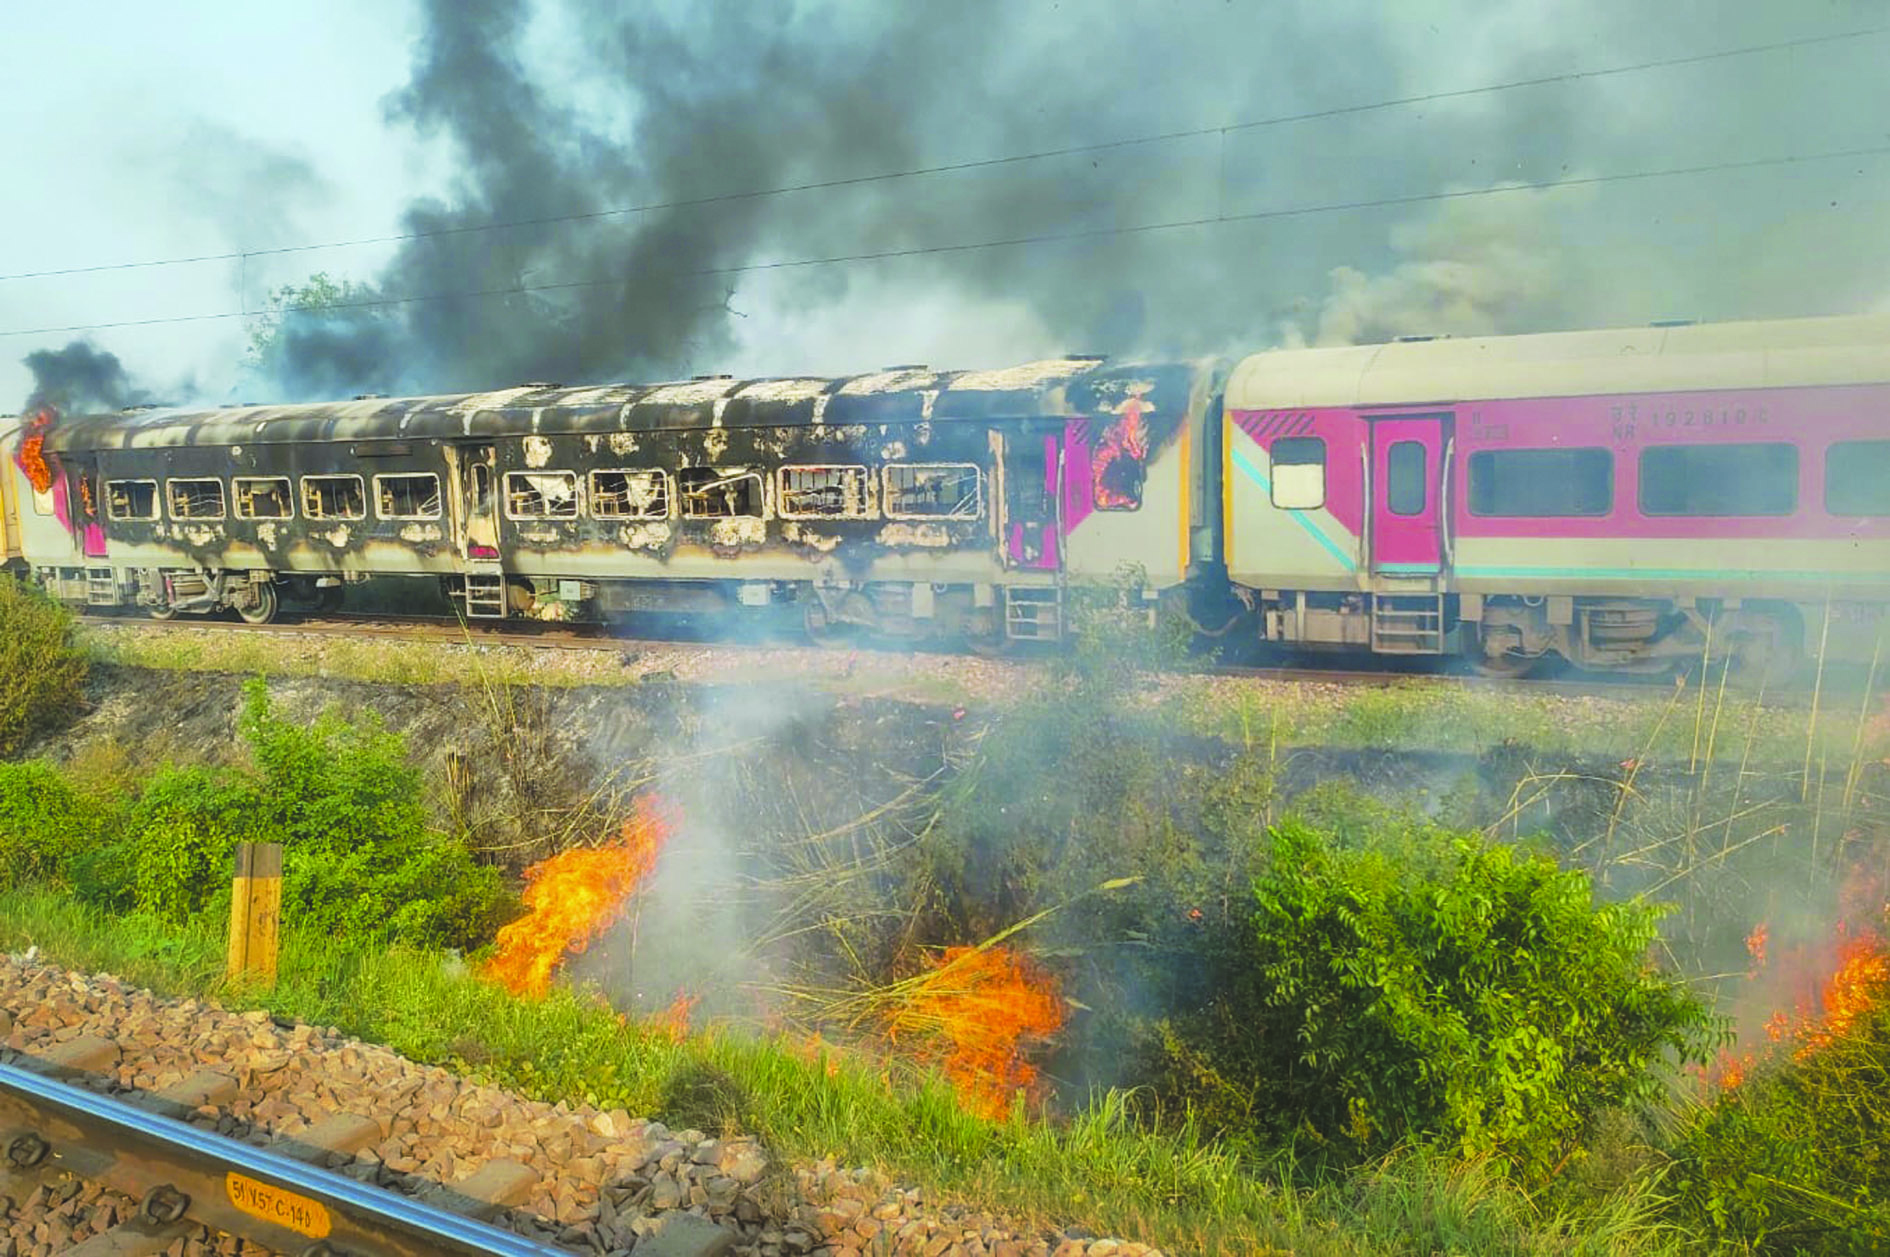 Coaches of the Patalkot Express after a fire broke out, in Agra, on  Wednesday. (PTI) - The Shillong Times